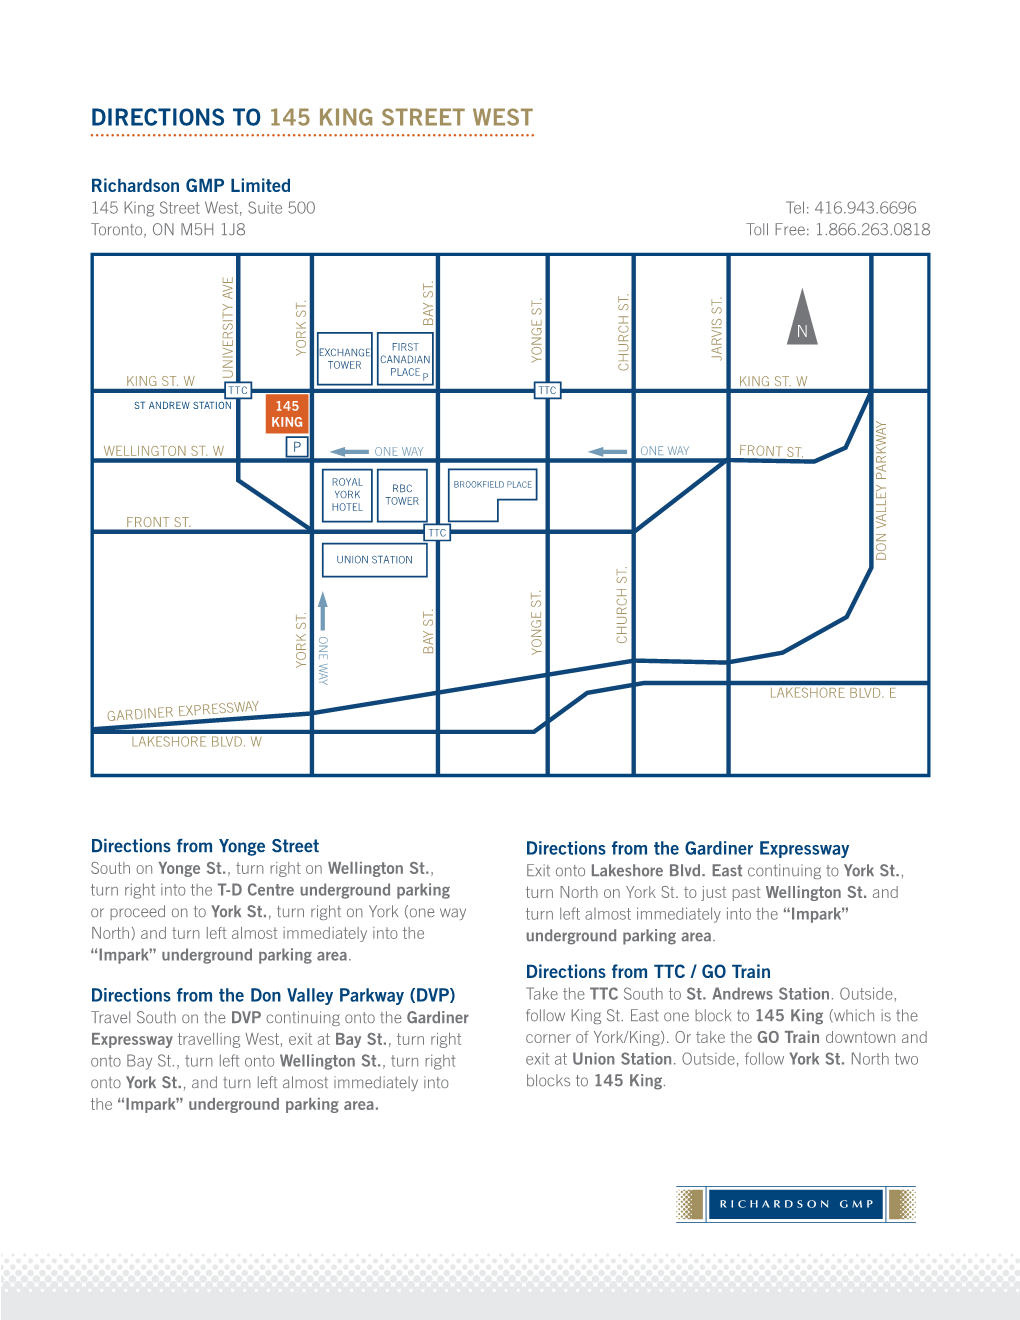 Directions to 145 King Street West